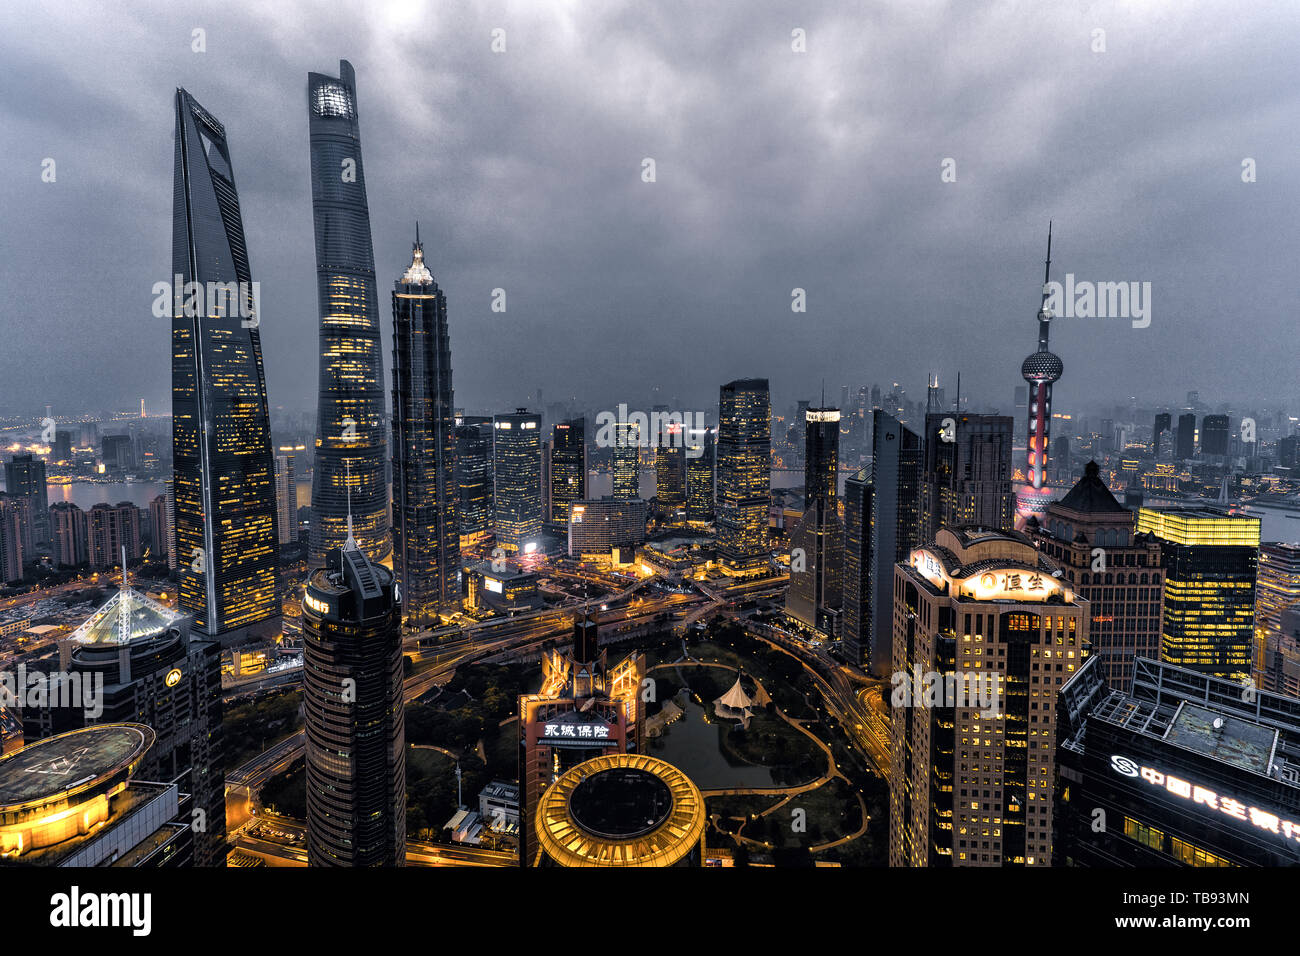 Evening night view of Lujiazui city in Shanghai Stock Photo